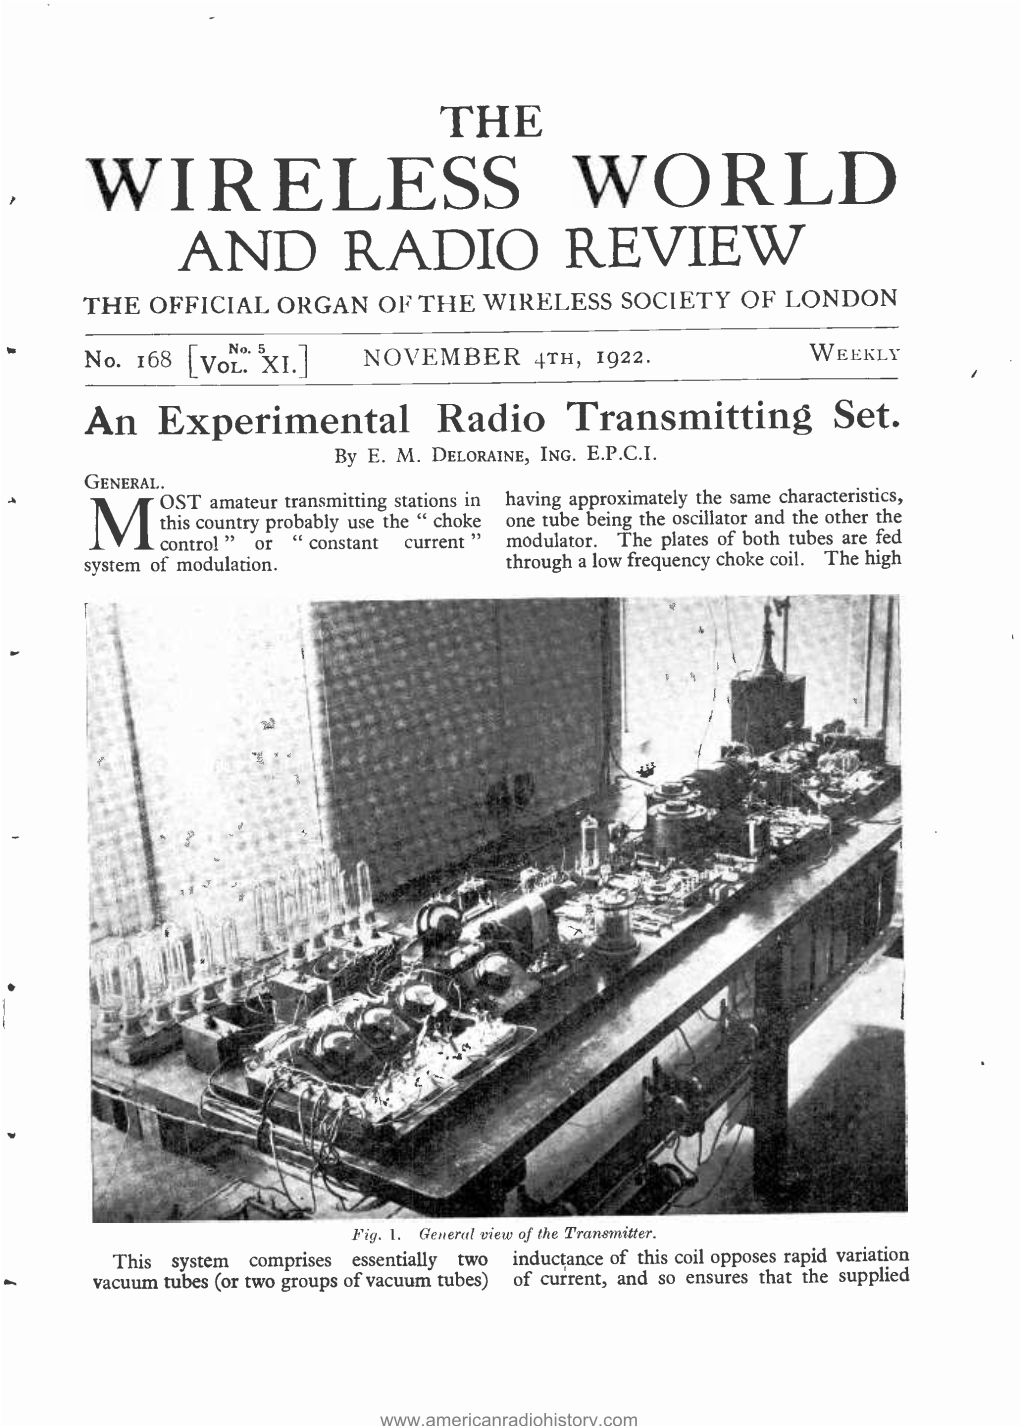 Wireless World and Radio Review the Official Organ of the Wireless Society of London